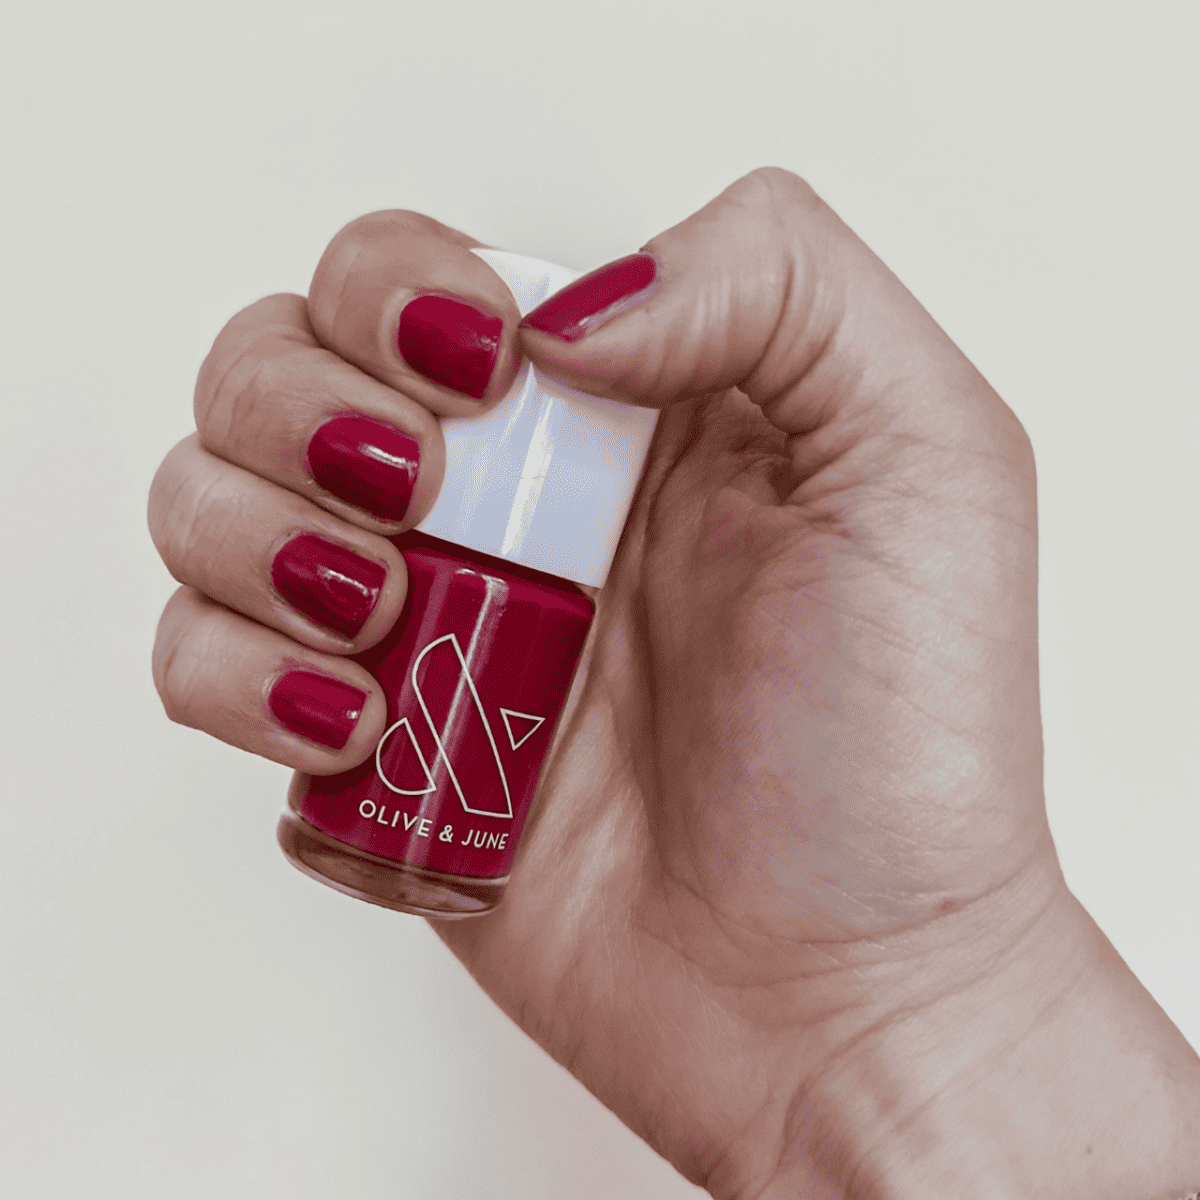 Olive & June "In the Clutch" nail polish (magenta red)